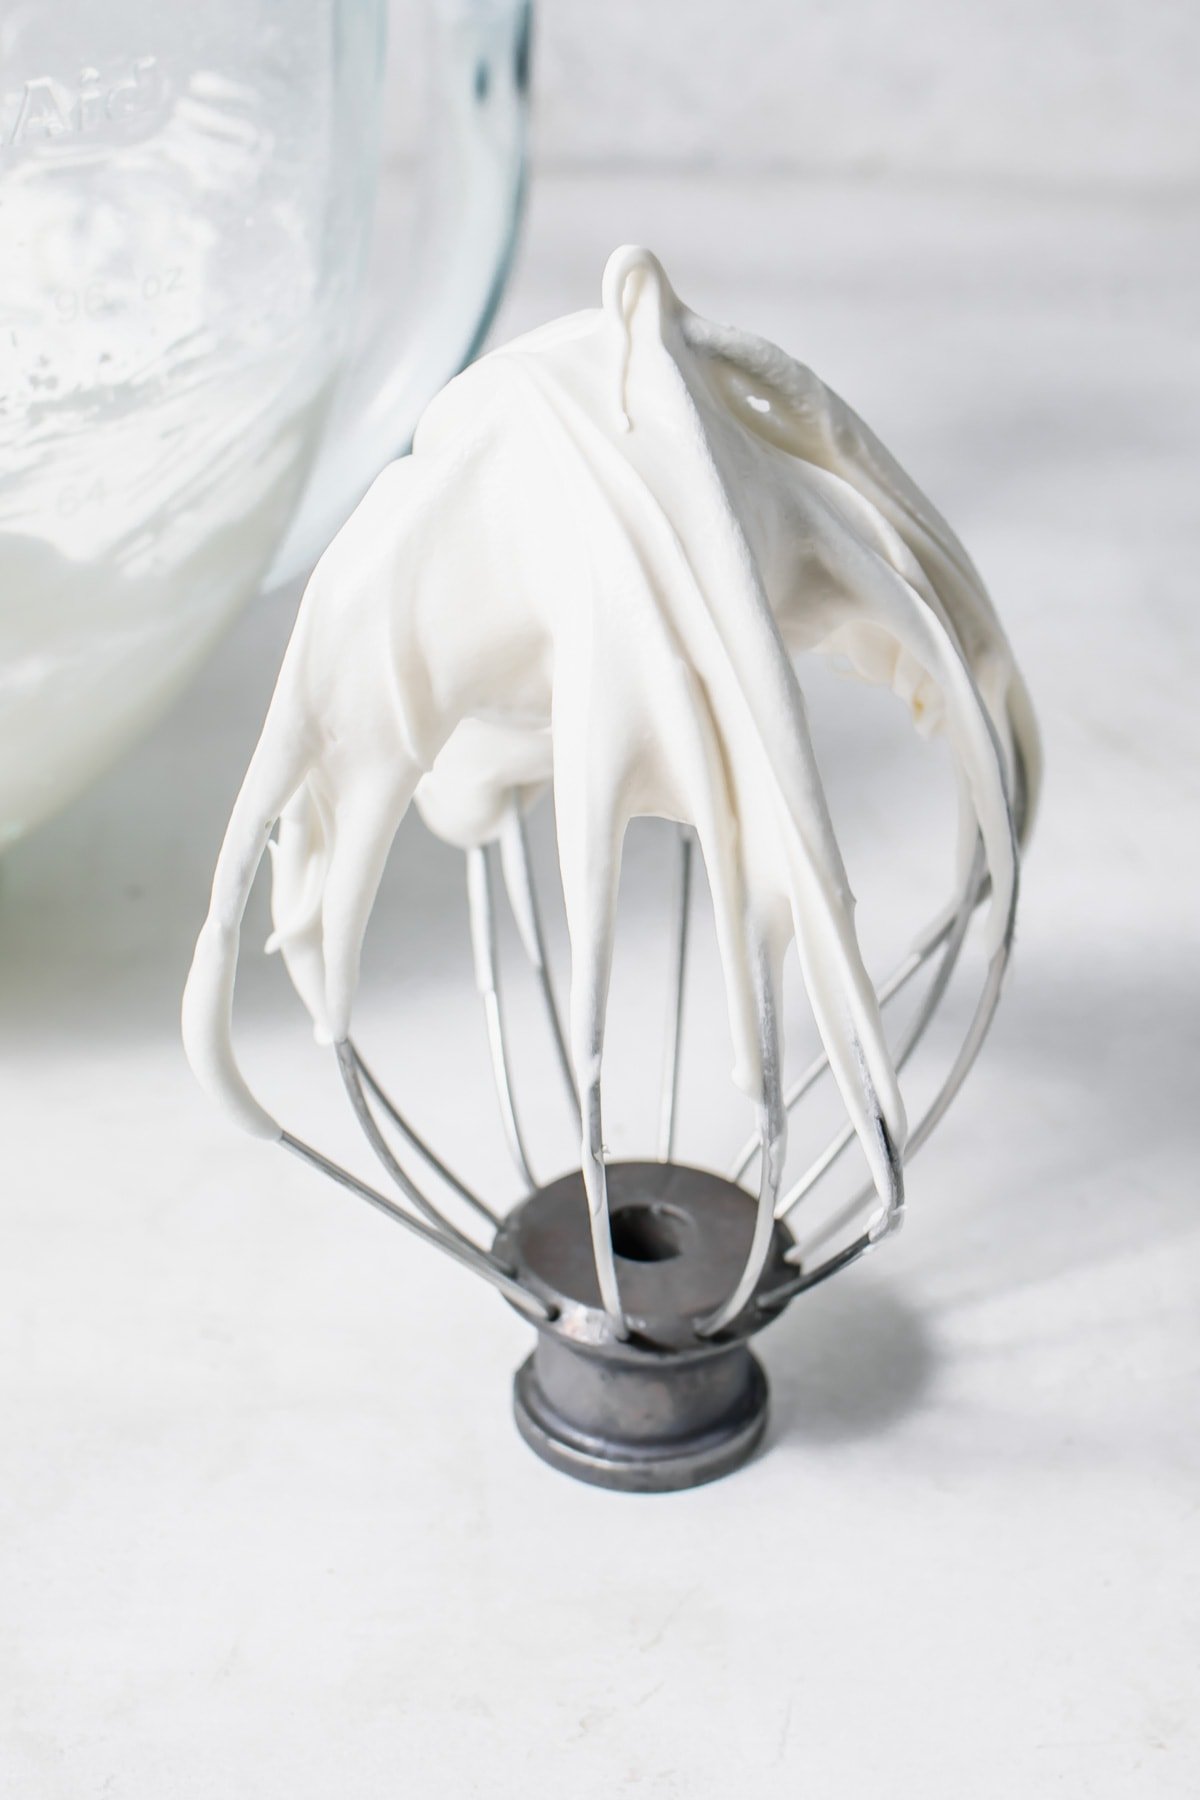 a whisk with cream cheese frosting